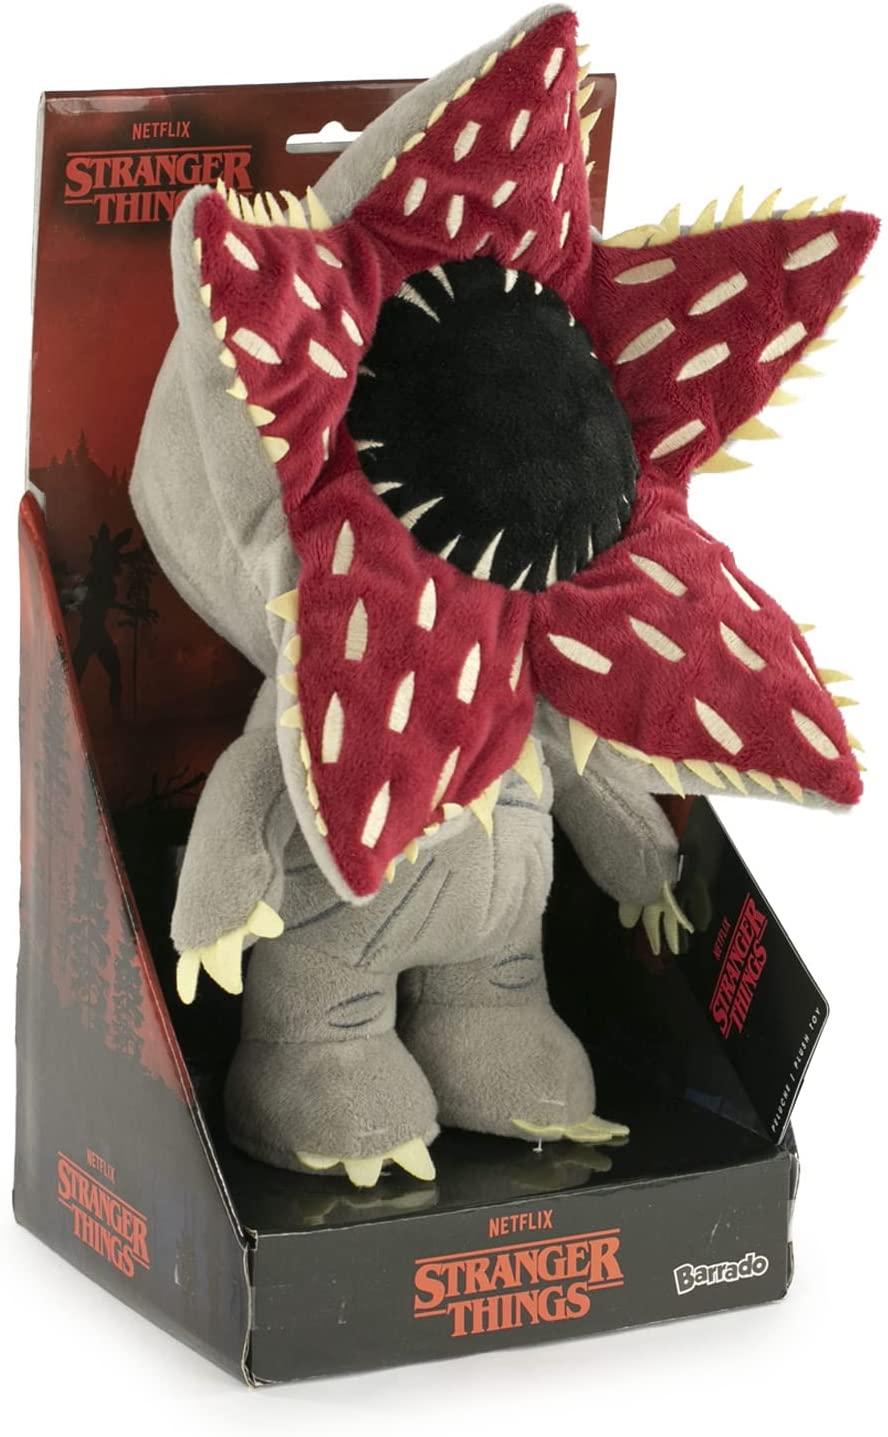 BARRADO Stranger Things - Soft Toy of the Characters of Stranger Things - 28cm,